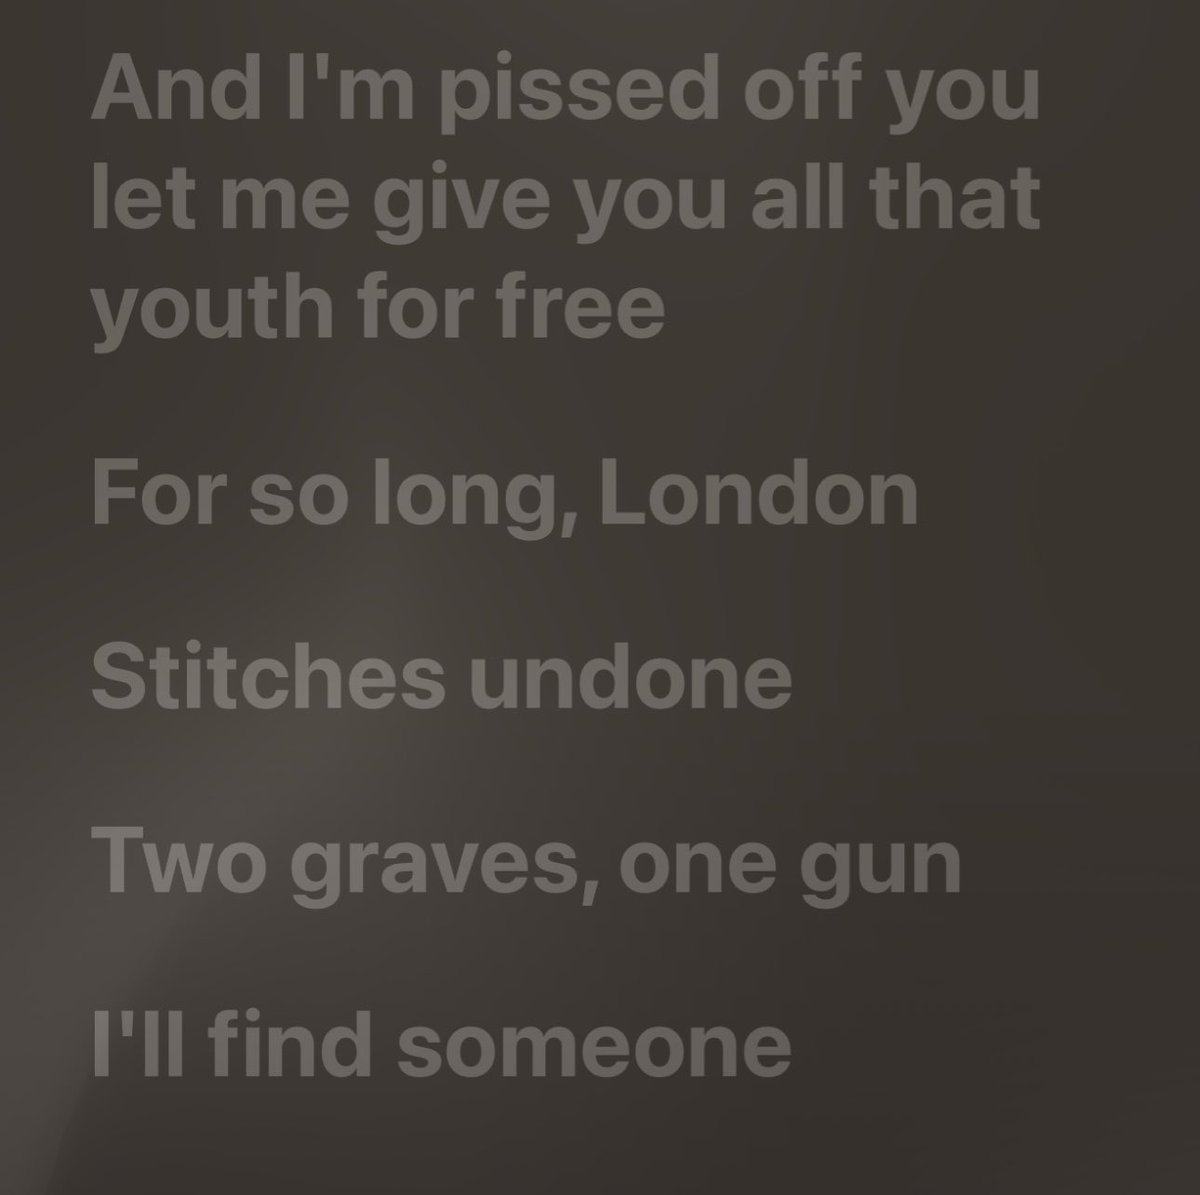 Obsessed with the dubble meaning of 'So Long, London'. We have 'so long' meaning goodbye and also how long she stayed in a sad place trying to make it work.